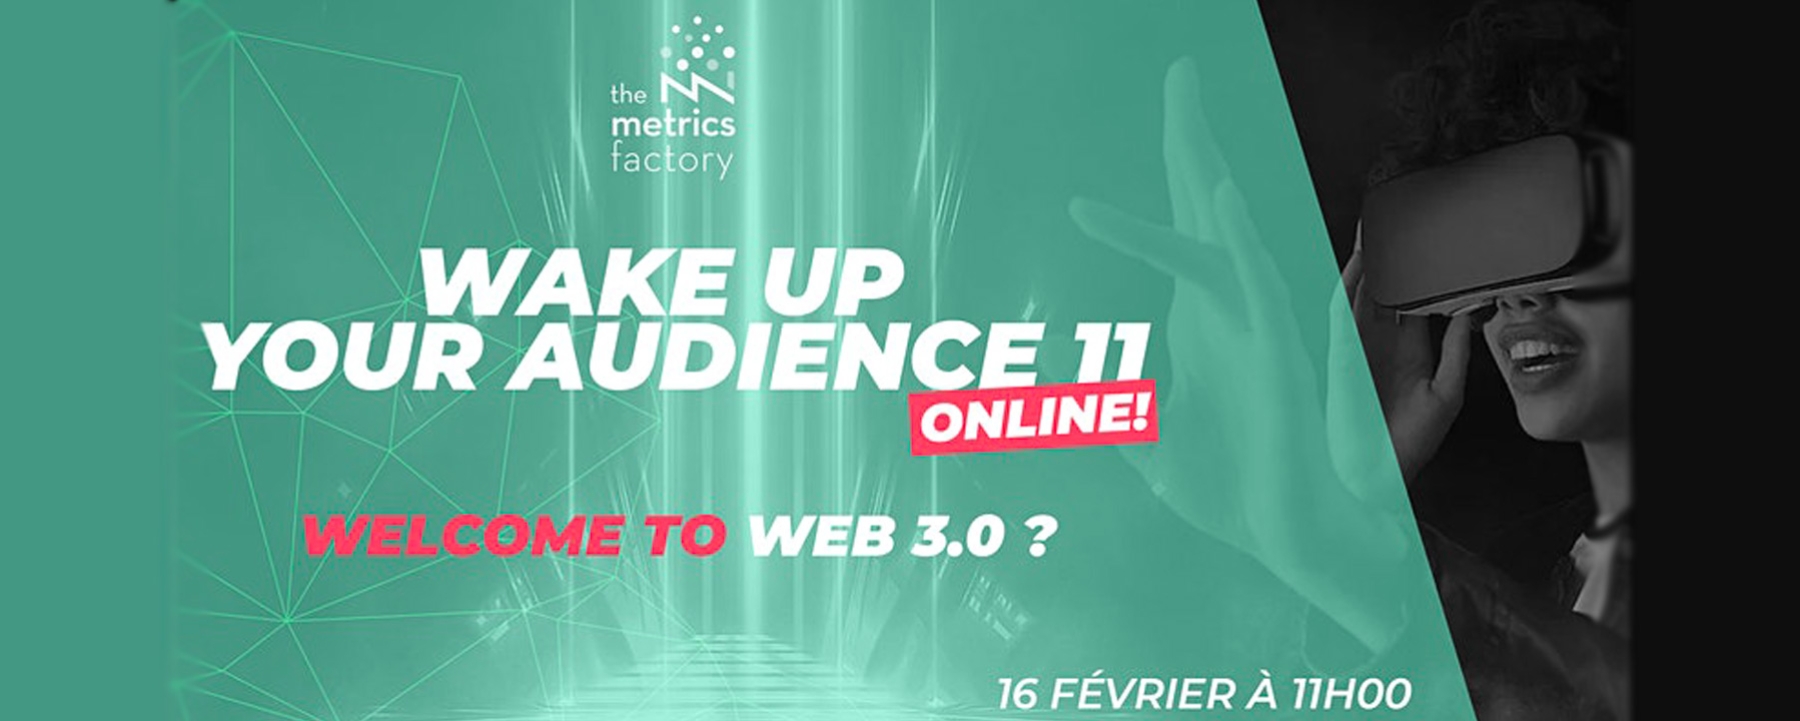 Wake Up Your Audience #11 - Welcome to Web 3.0 ?